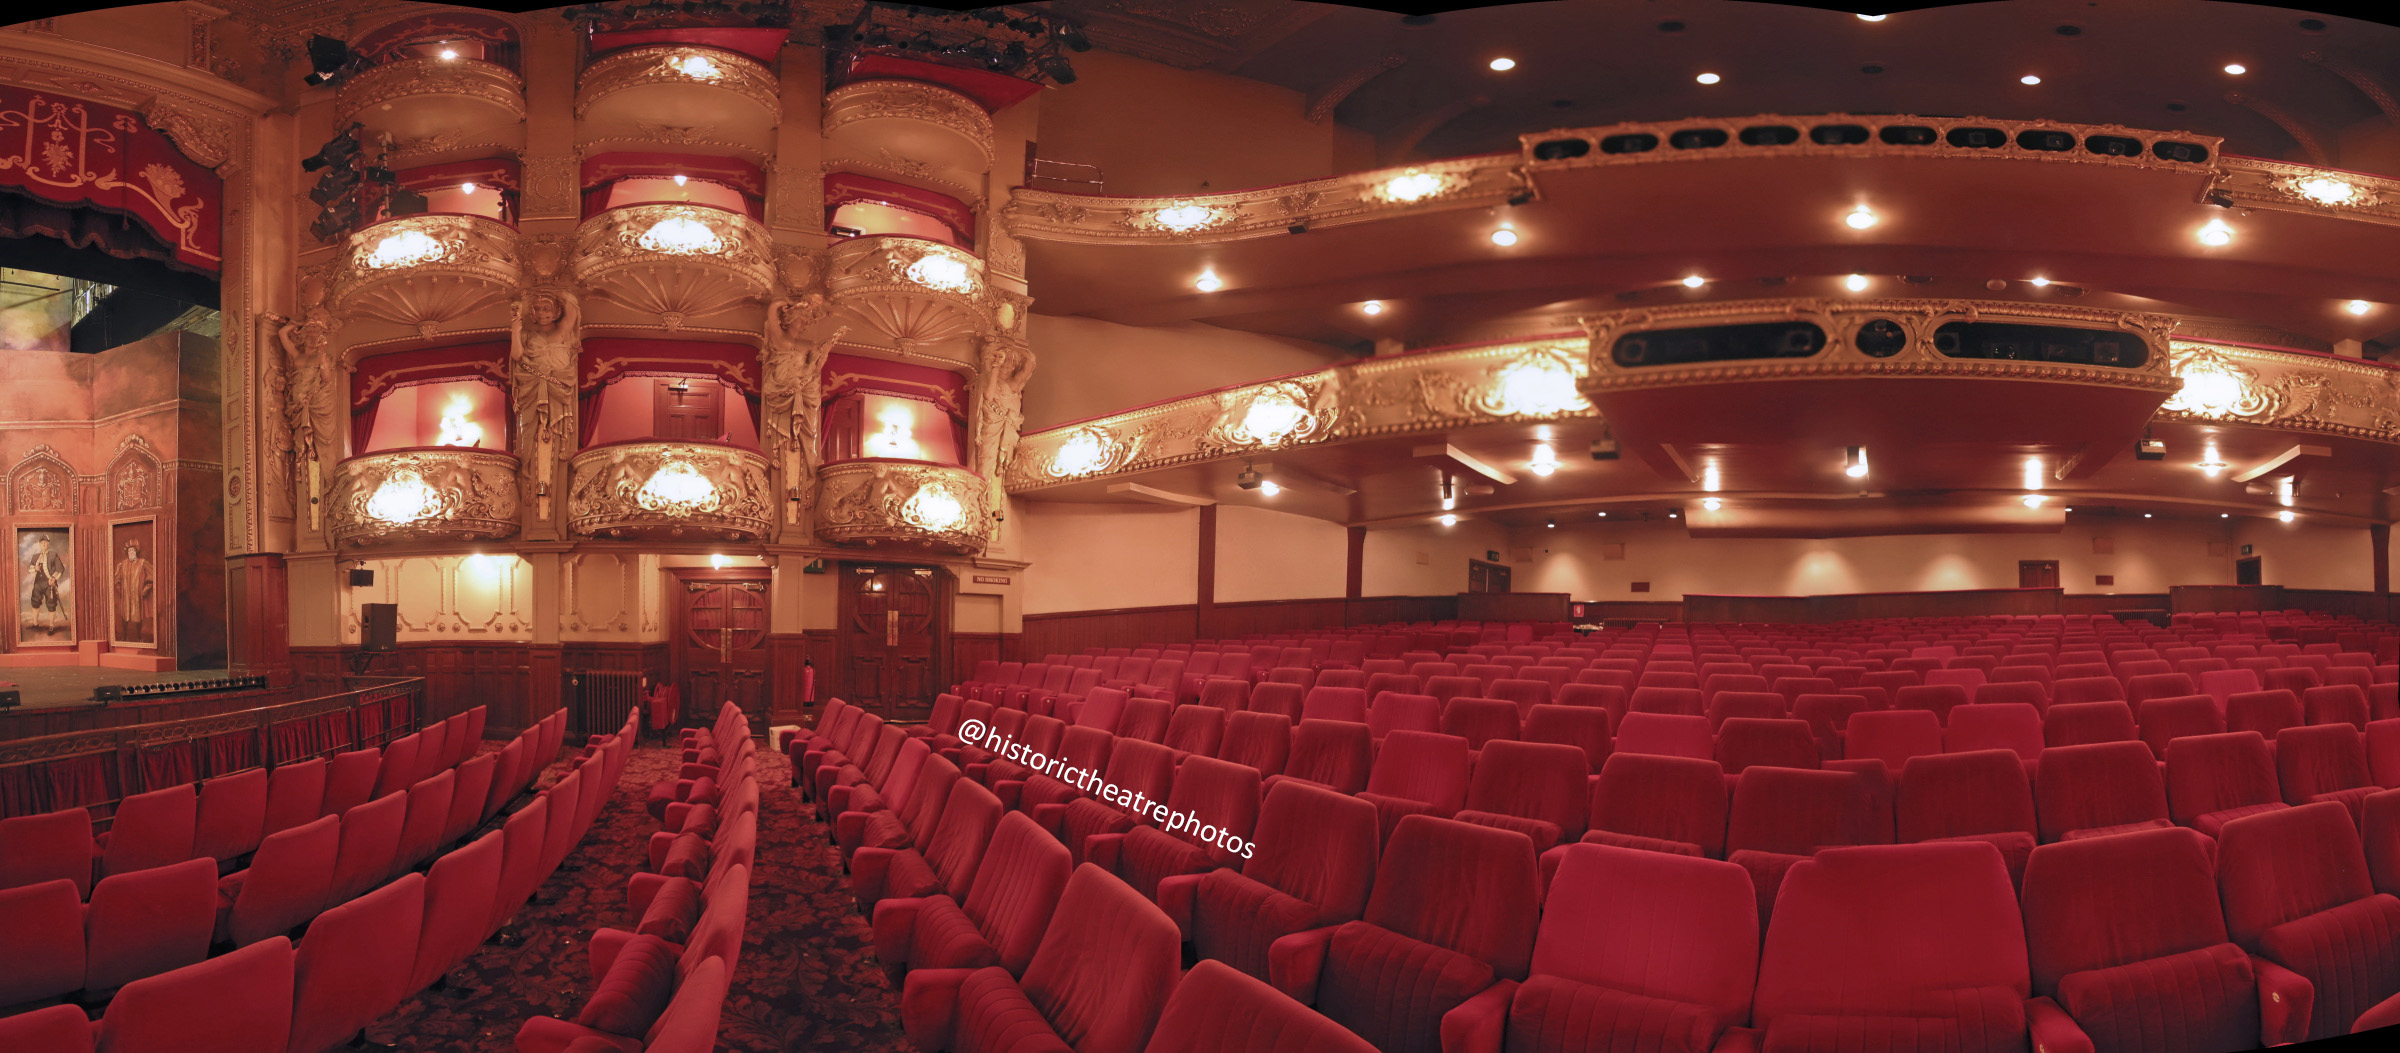 King’s Theatre, Edinburgh: Stalls from Stage to Circle